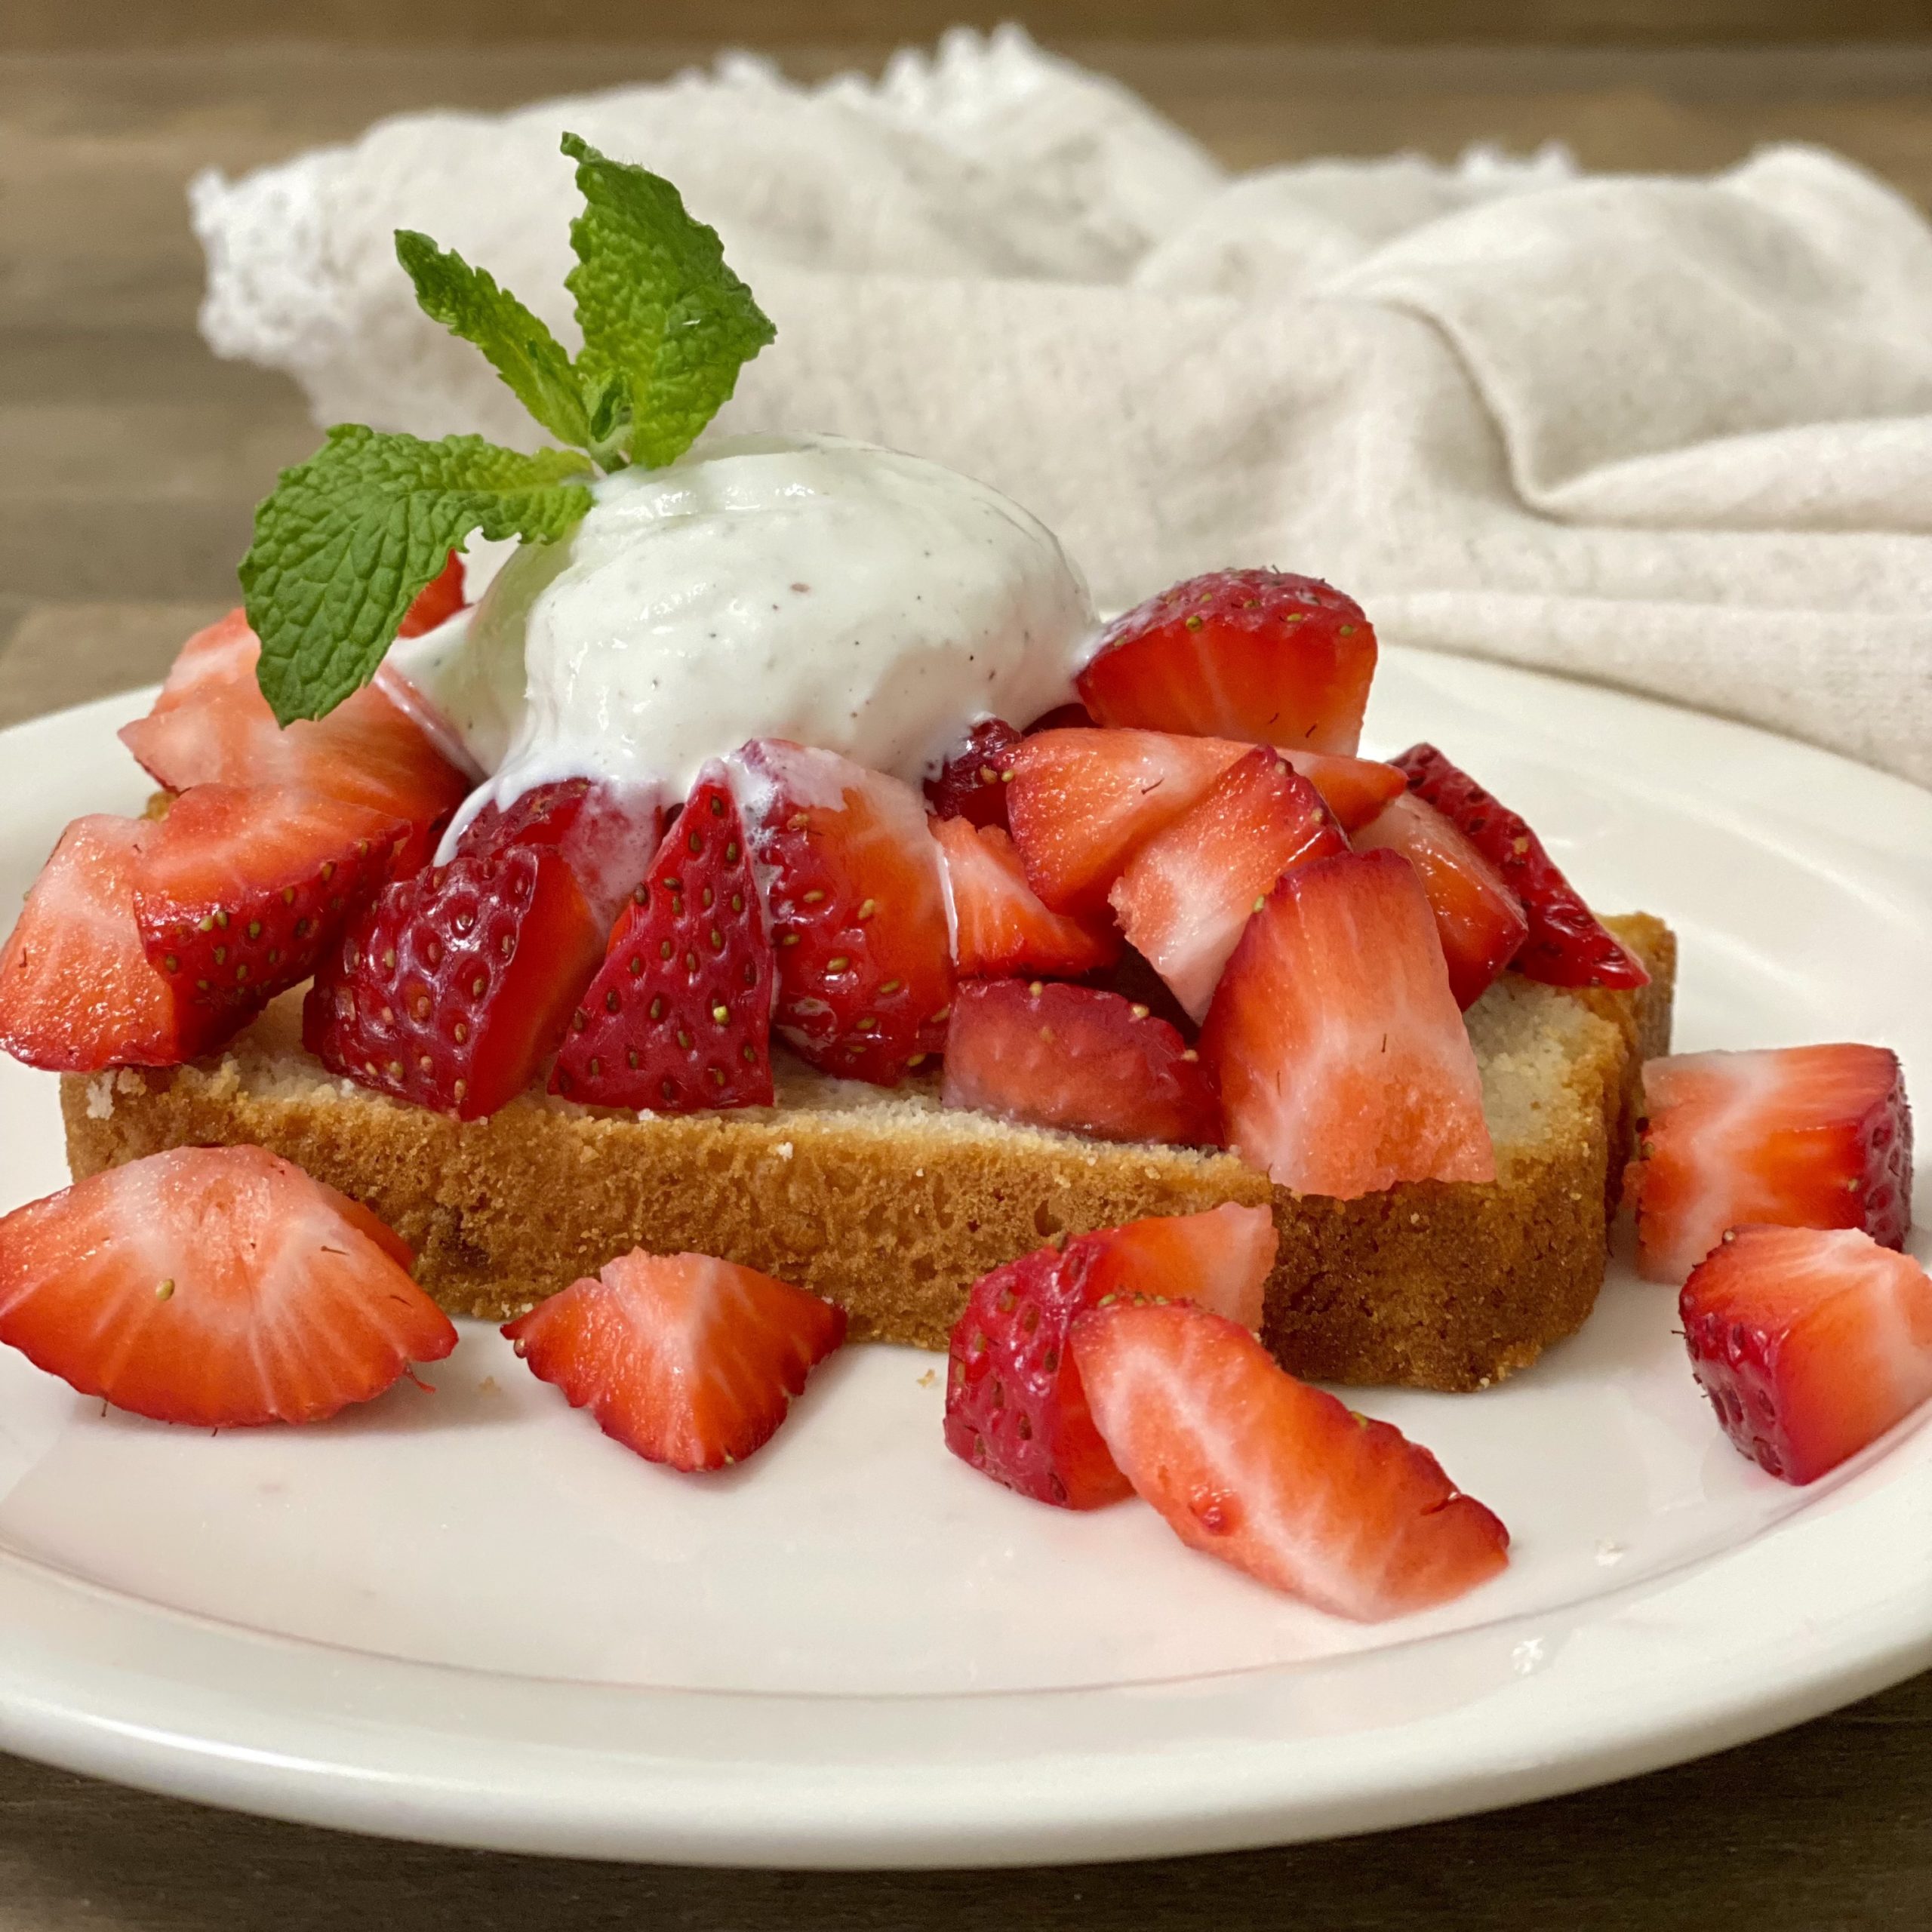 A slice of ice cream bread with strawberries and vanilla ice cream on top. Garnished with a mint spring on a white plate.